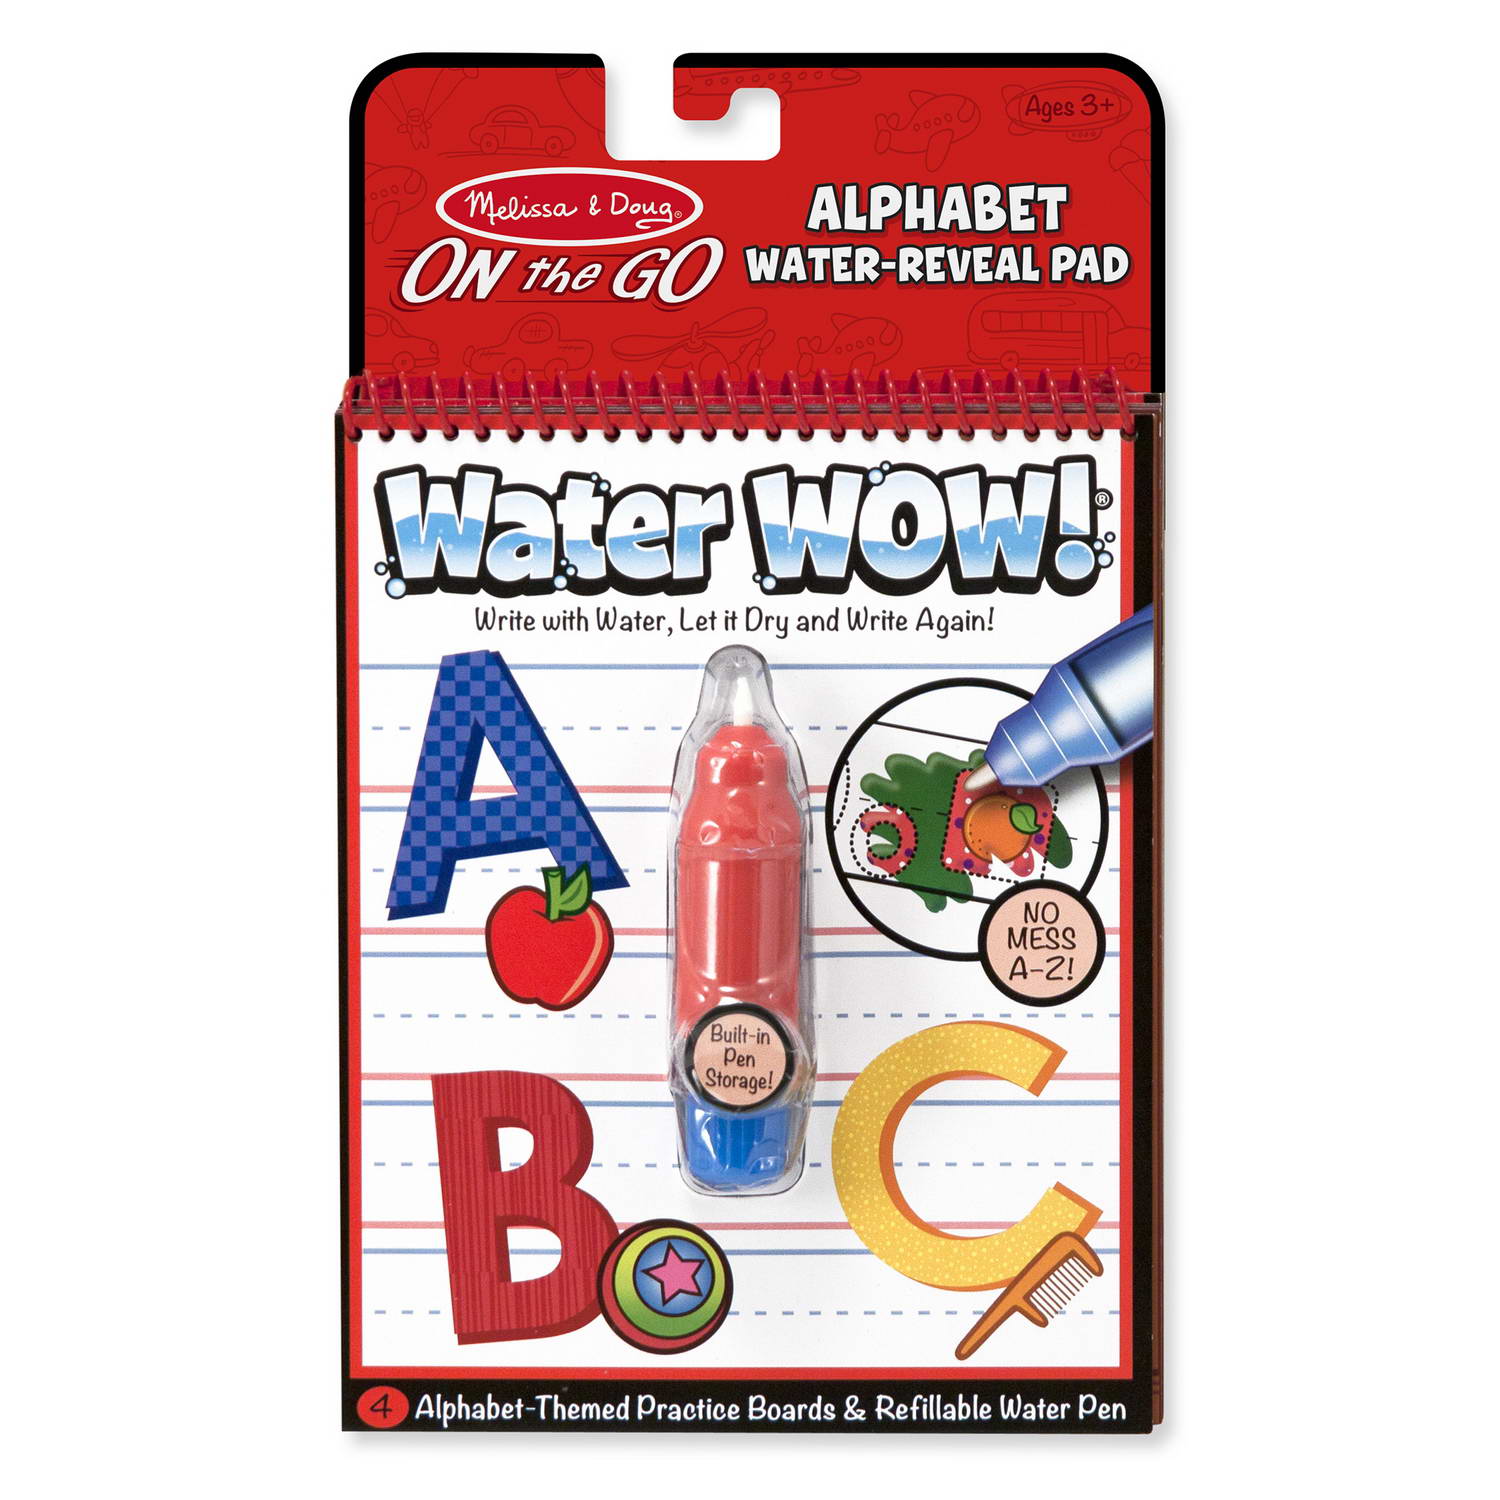 Download Water Wow! - Alphabet: Rebecca's Toys & Prizes